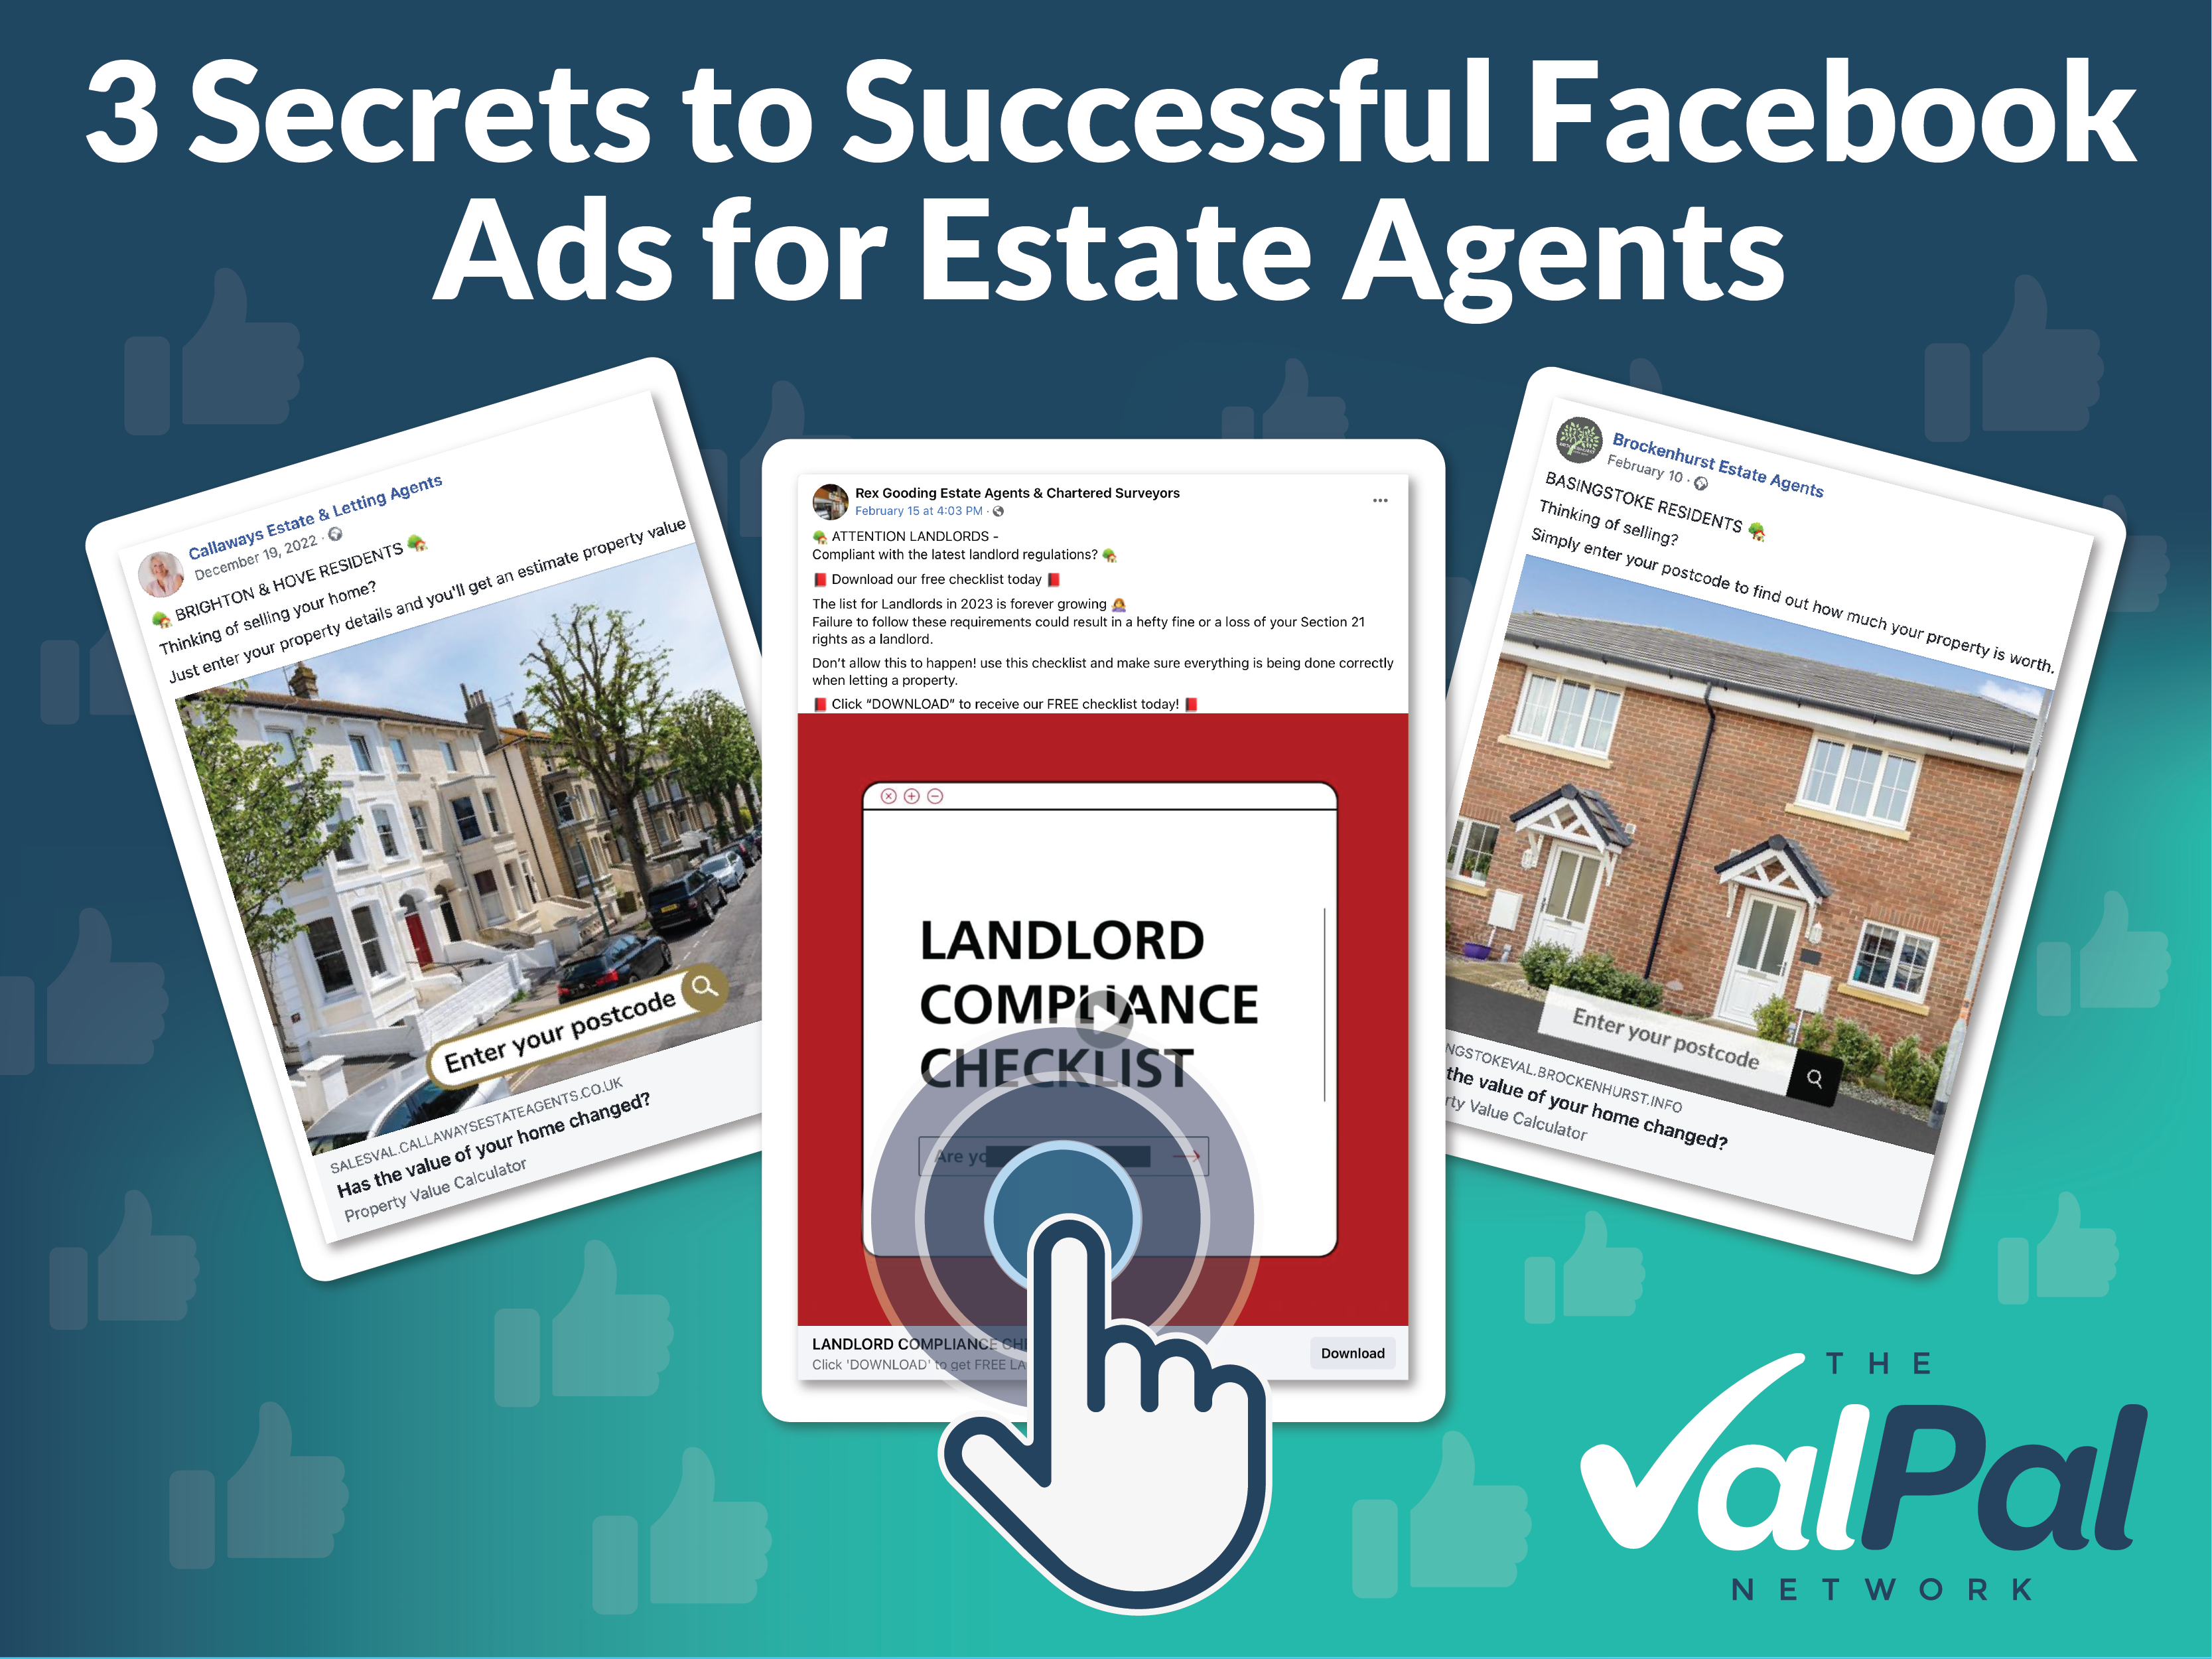 The Secret To Successful Facebook Ads For Estate Agents